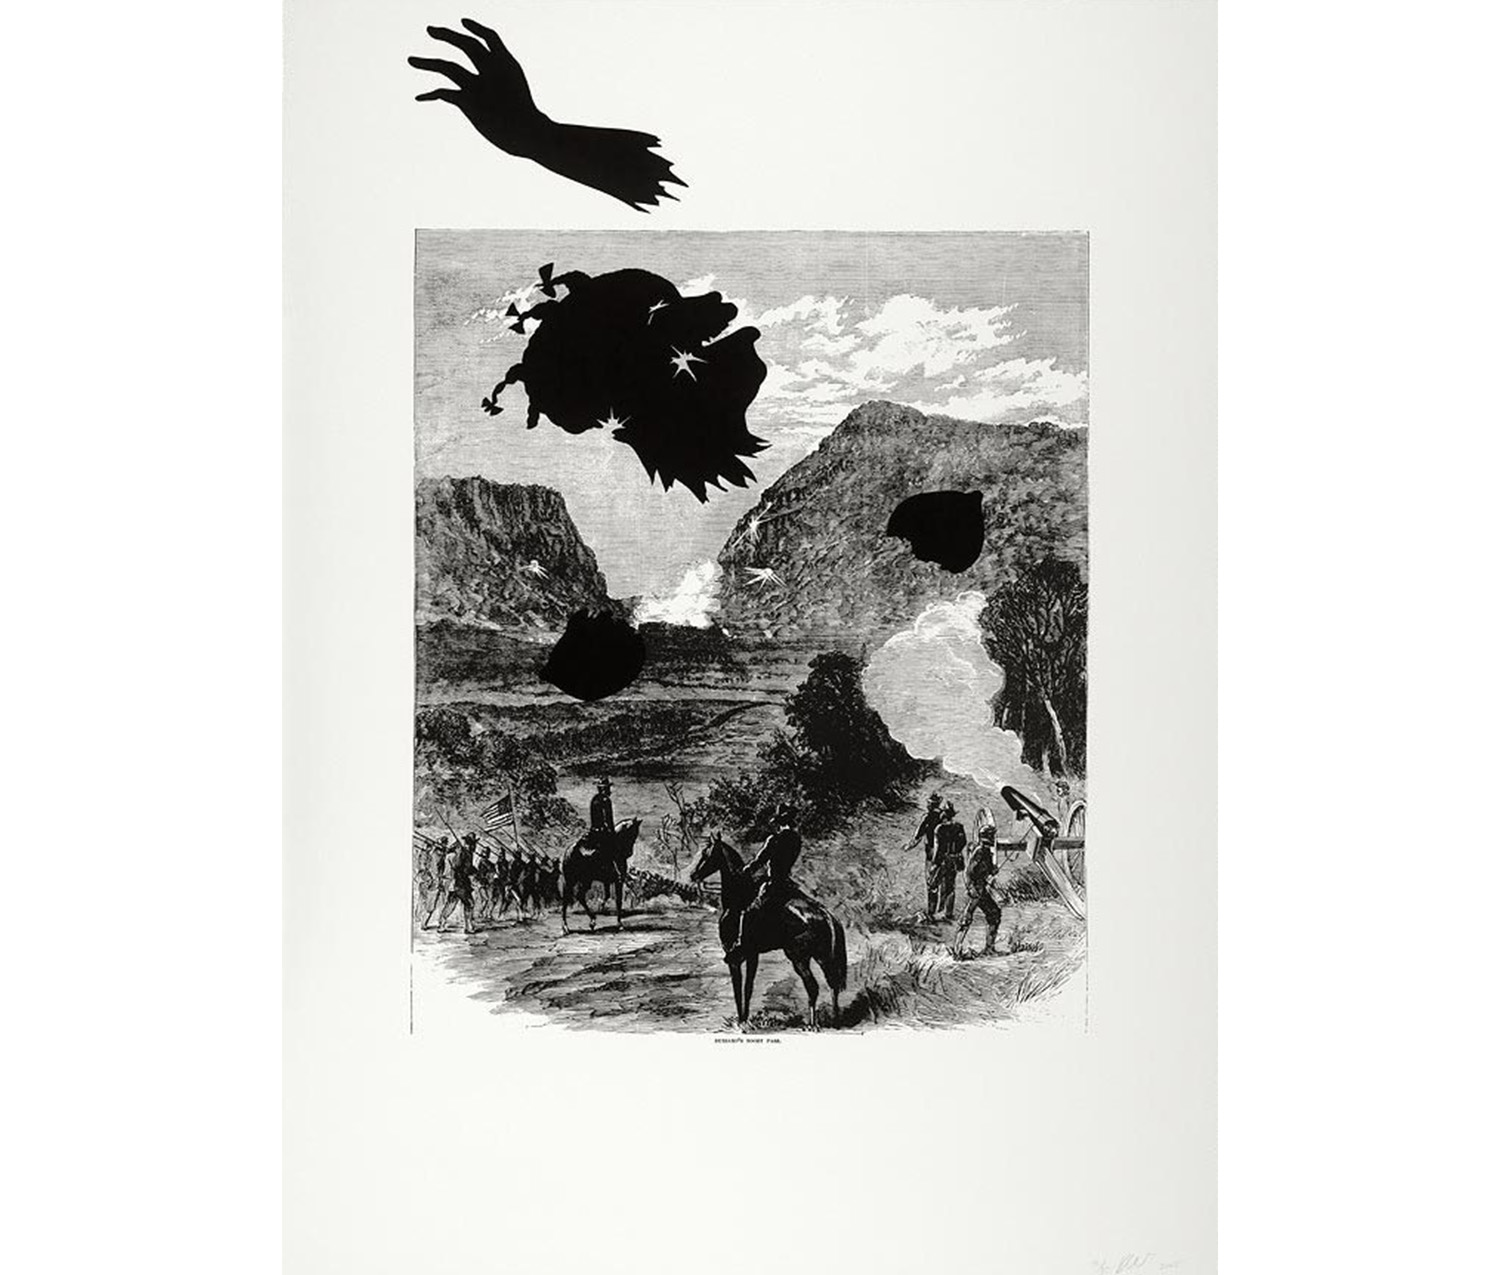 mountainous landscape with soldiers on horses; silhouette of Black woman in the sky; outstretched hand in top left corner